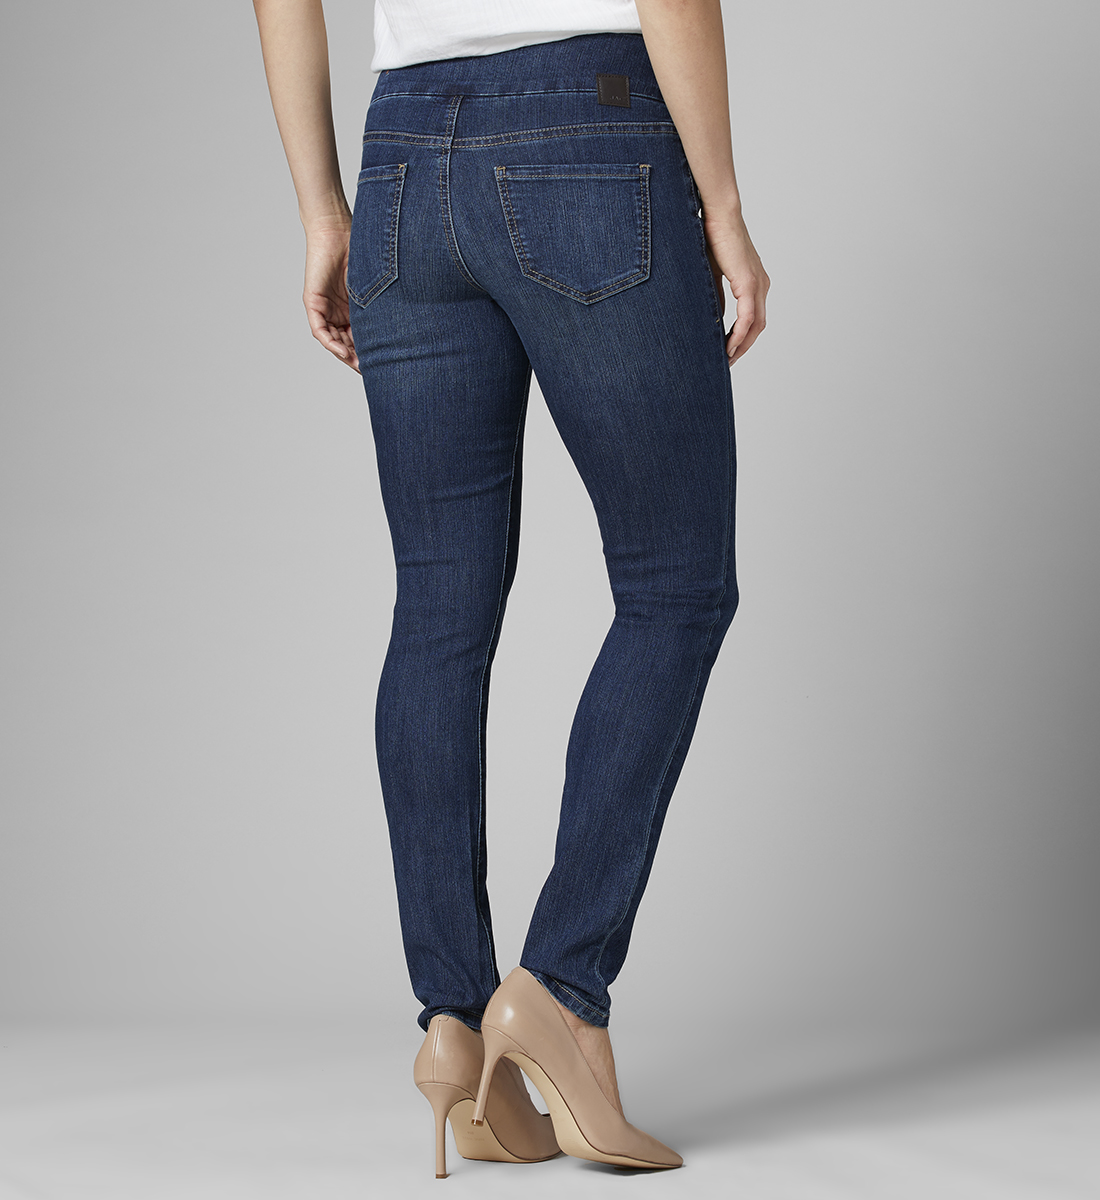 Nora Mid Rise Skinny Jeans - Jag Jeans US